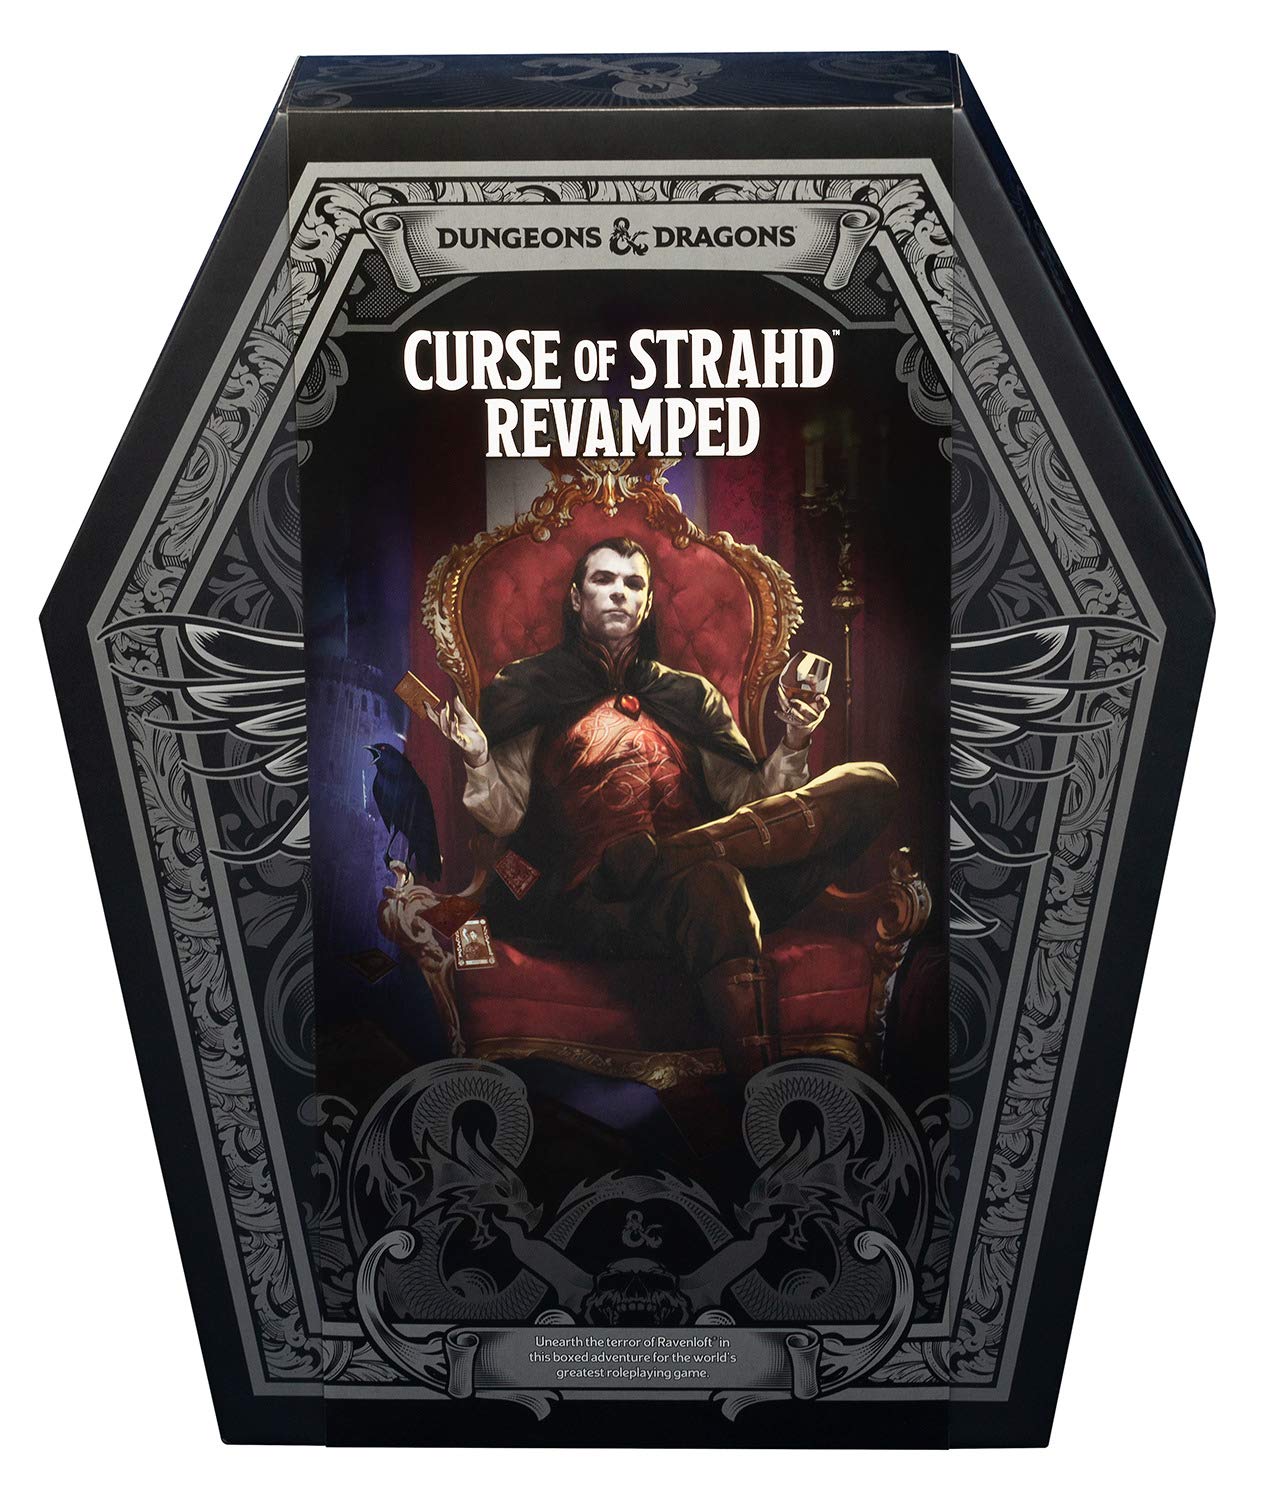 Dungeons & Dragons 5th Edition: Curse of Strahd Revamed